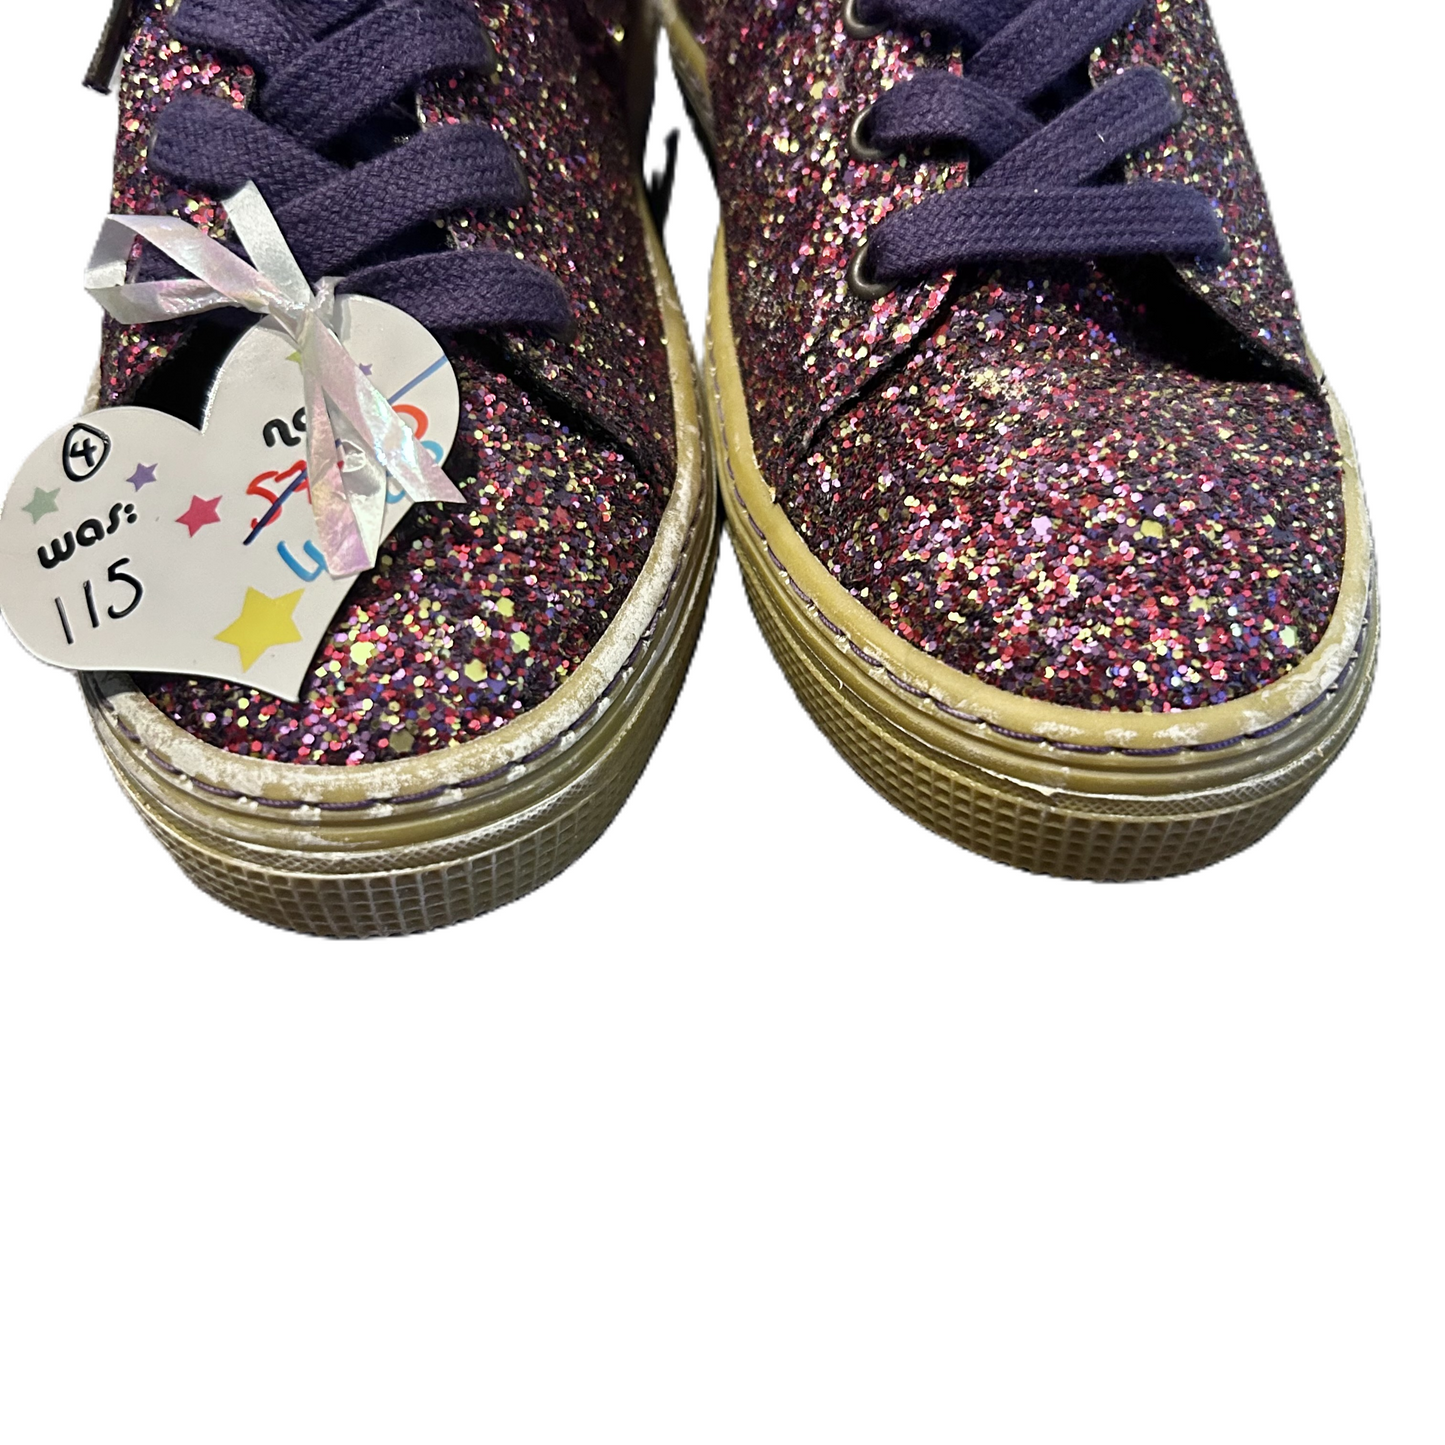 Shoes Sneakers By Irregular Choice   Size: 10.5